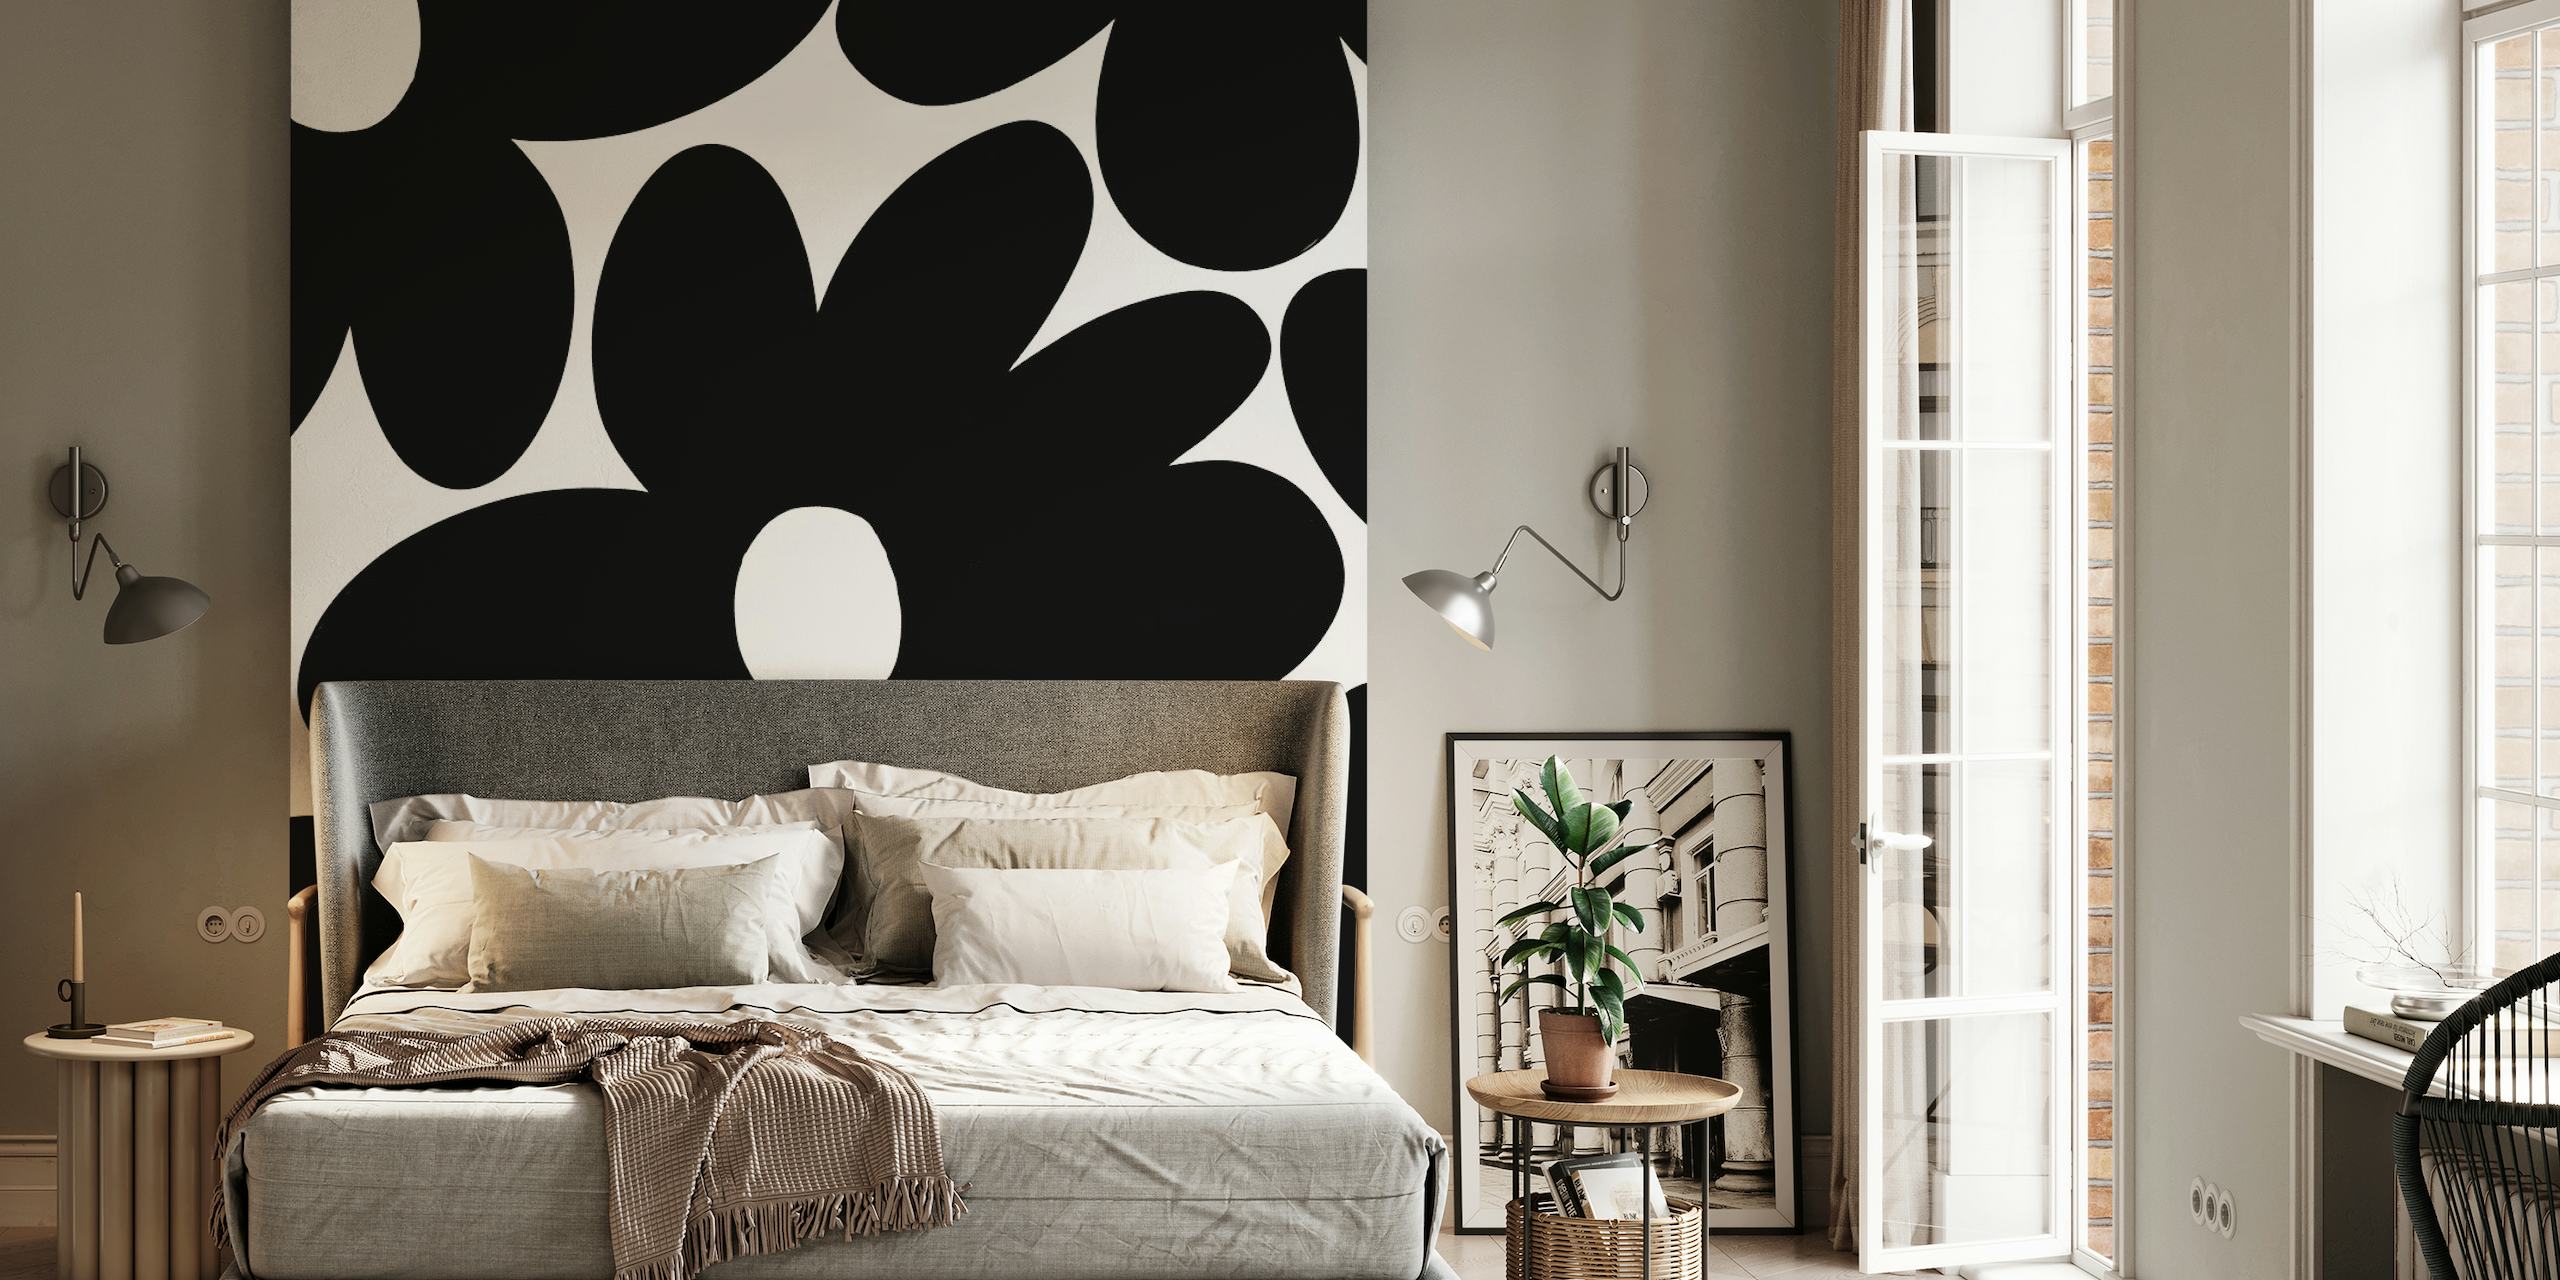 Black and white retro daisy flower pattern wall mural